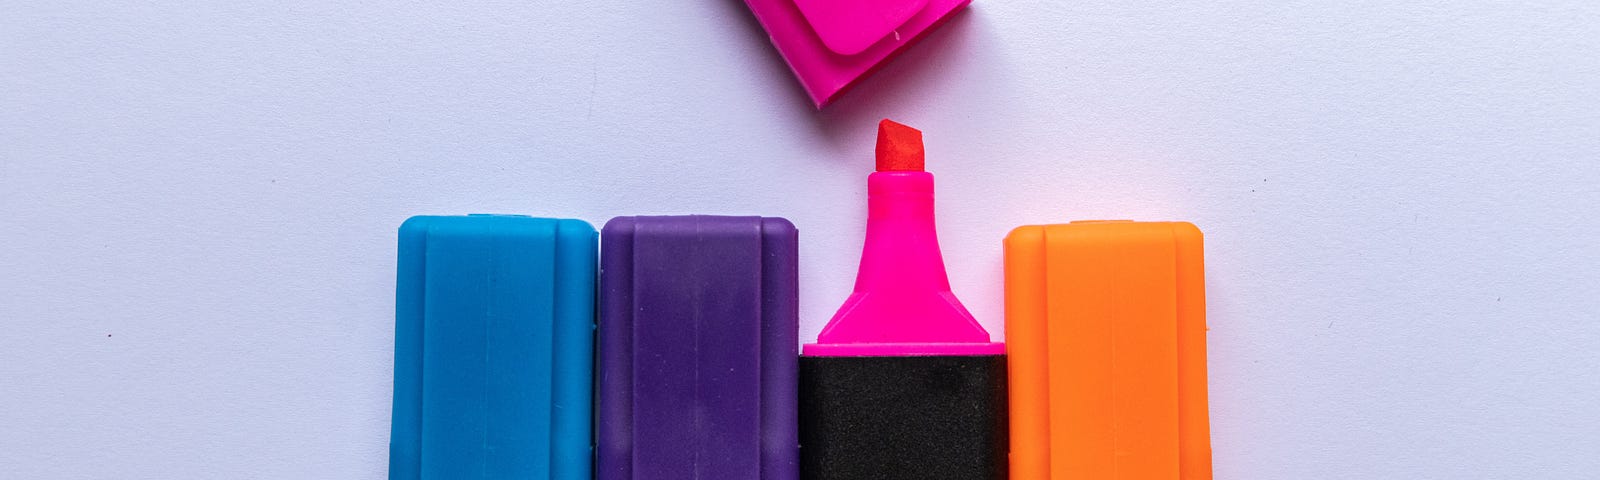 Photo of highlighters in a row on a blank page.